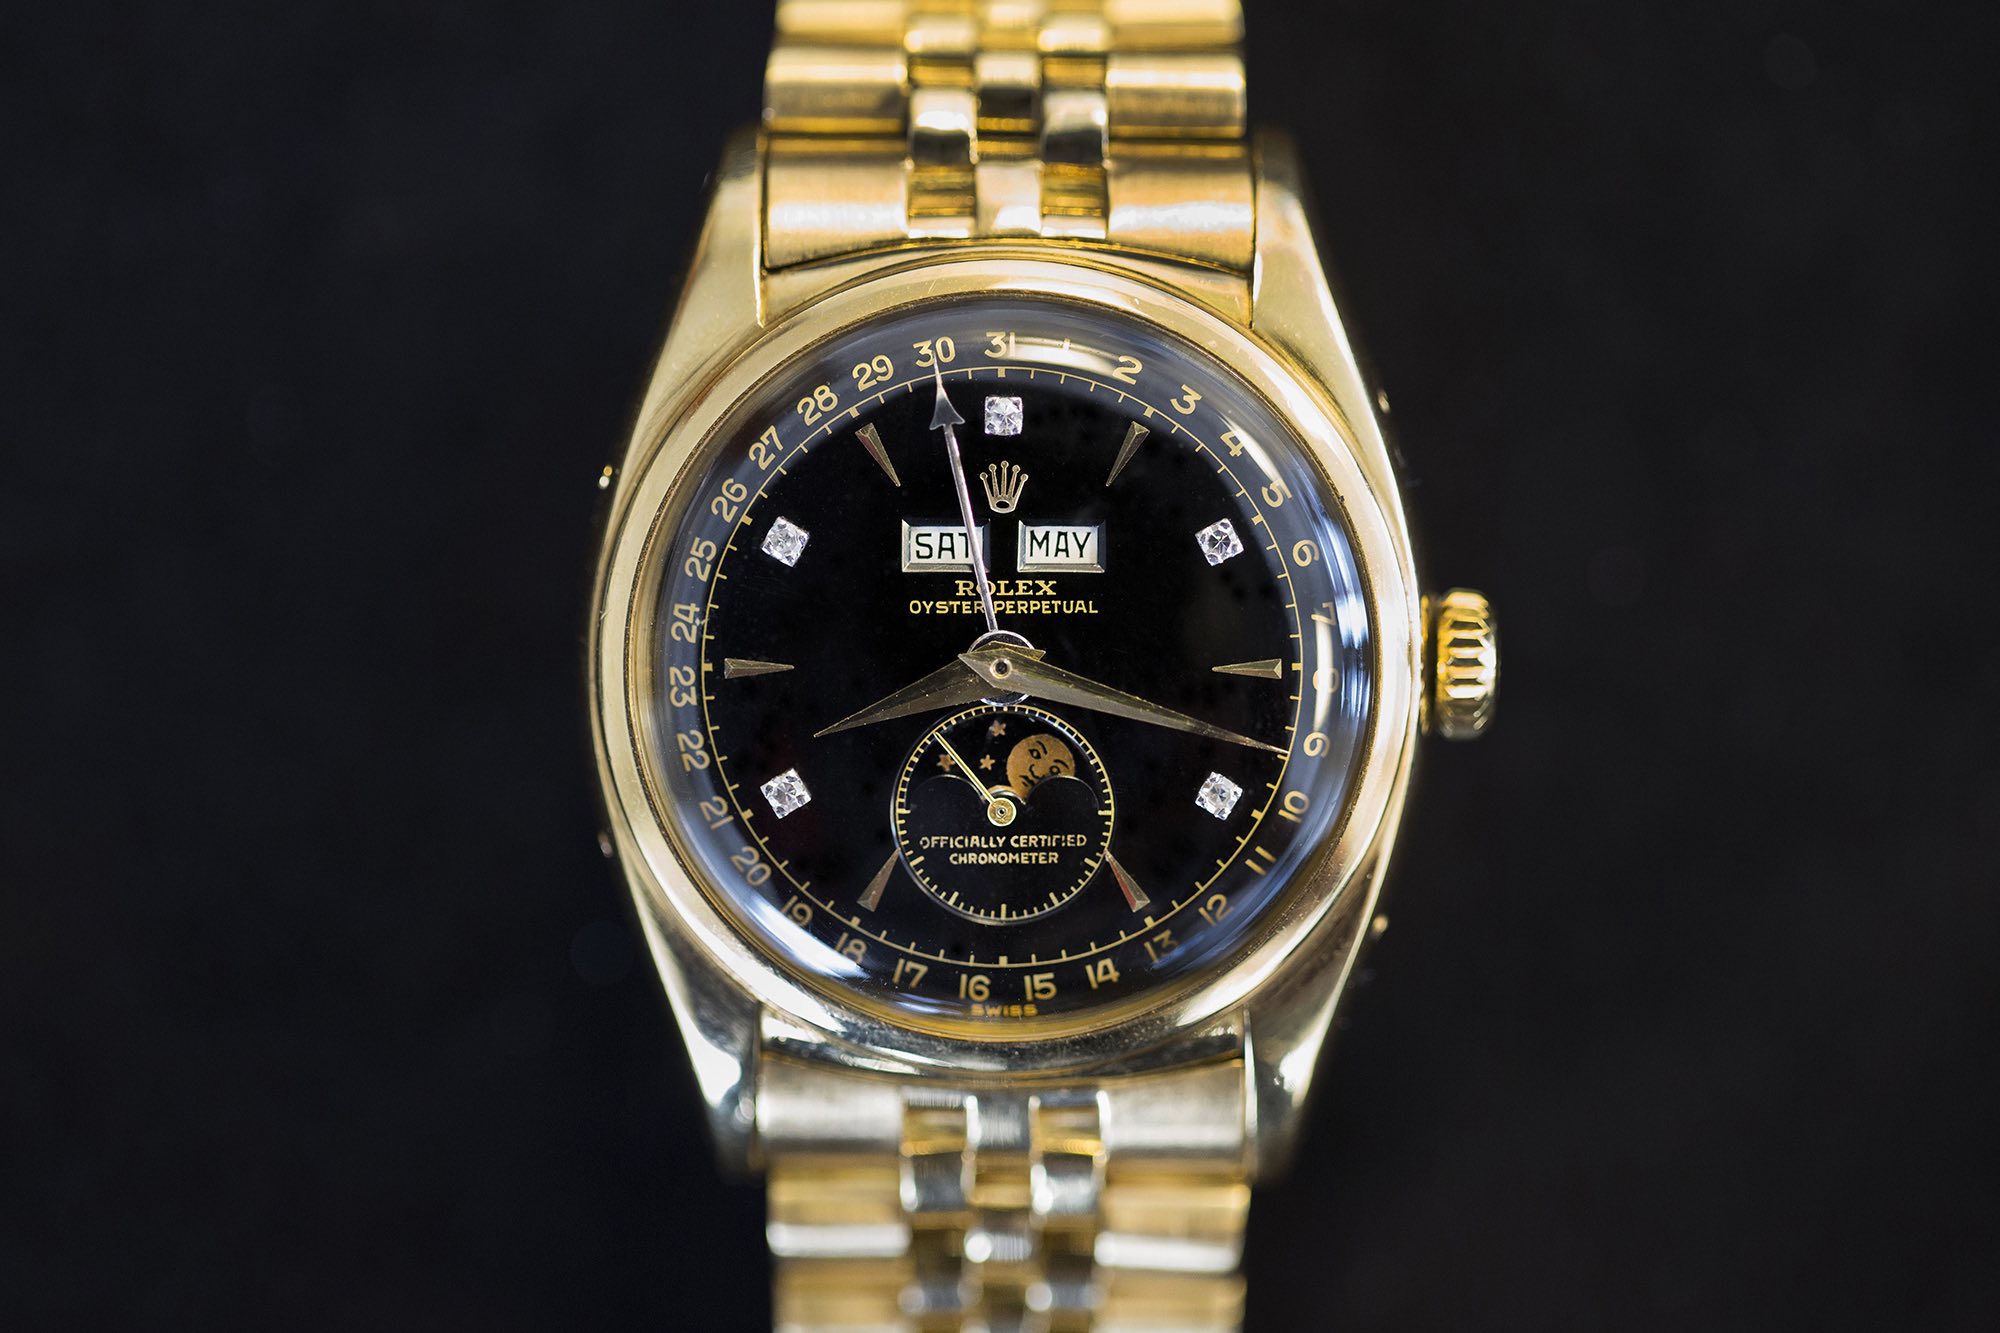 Could This Be the World's Most Rolex? - Bloomberg